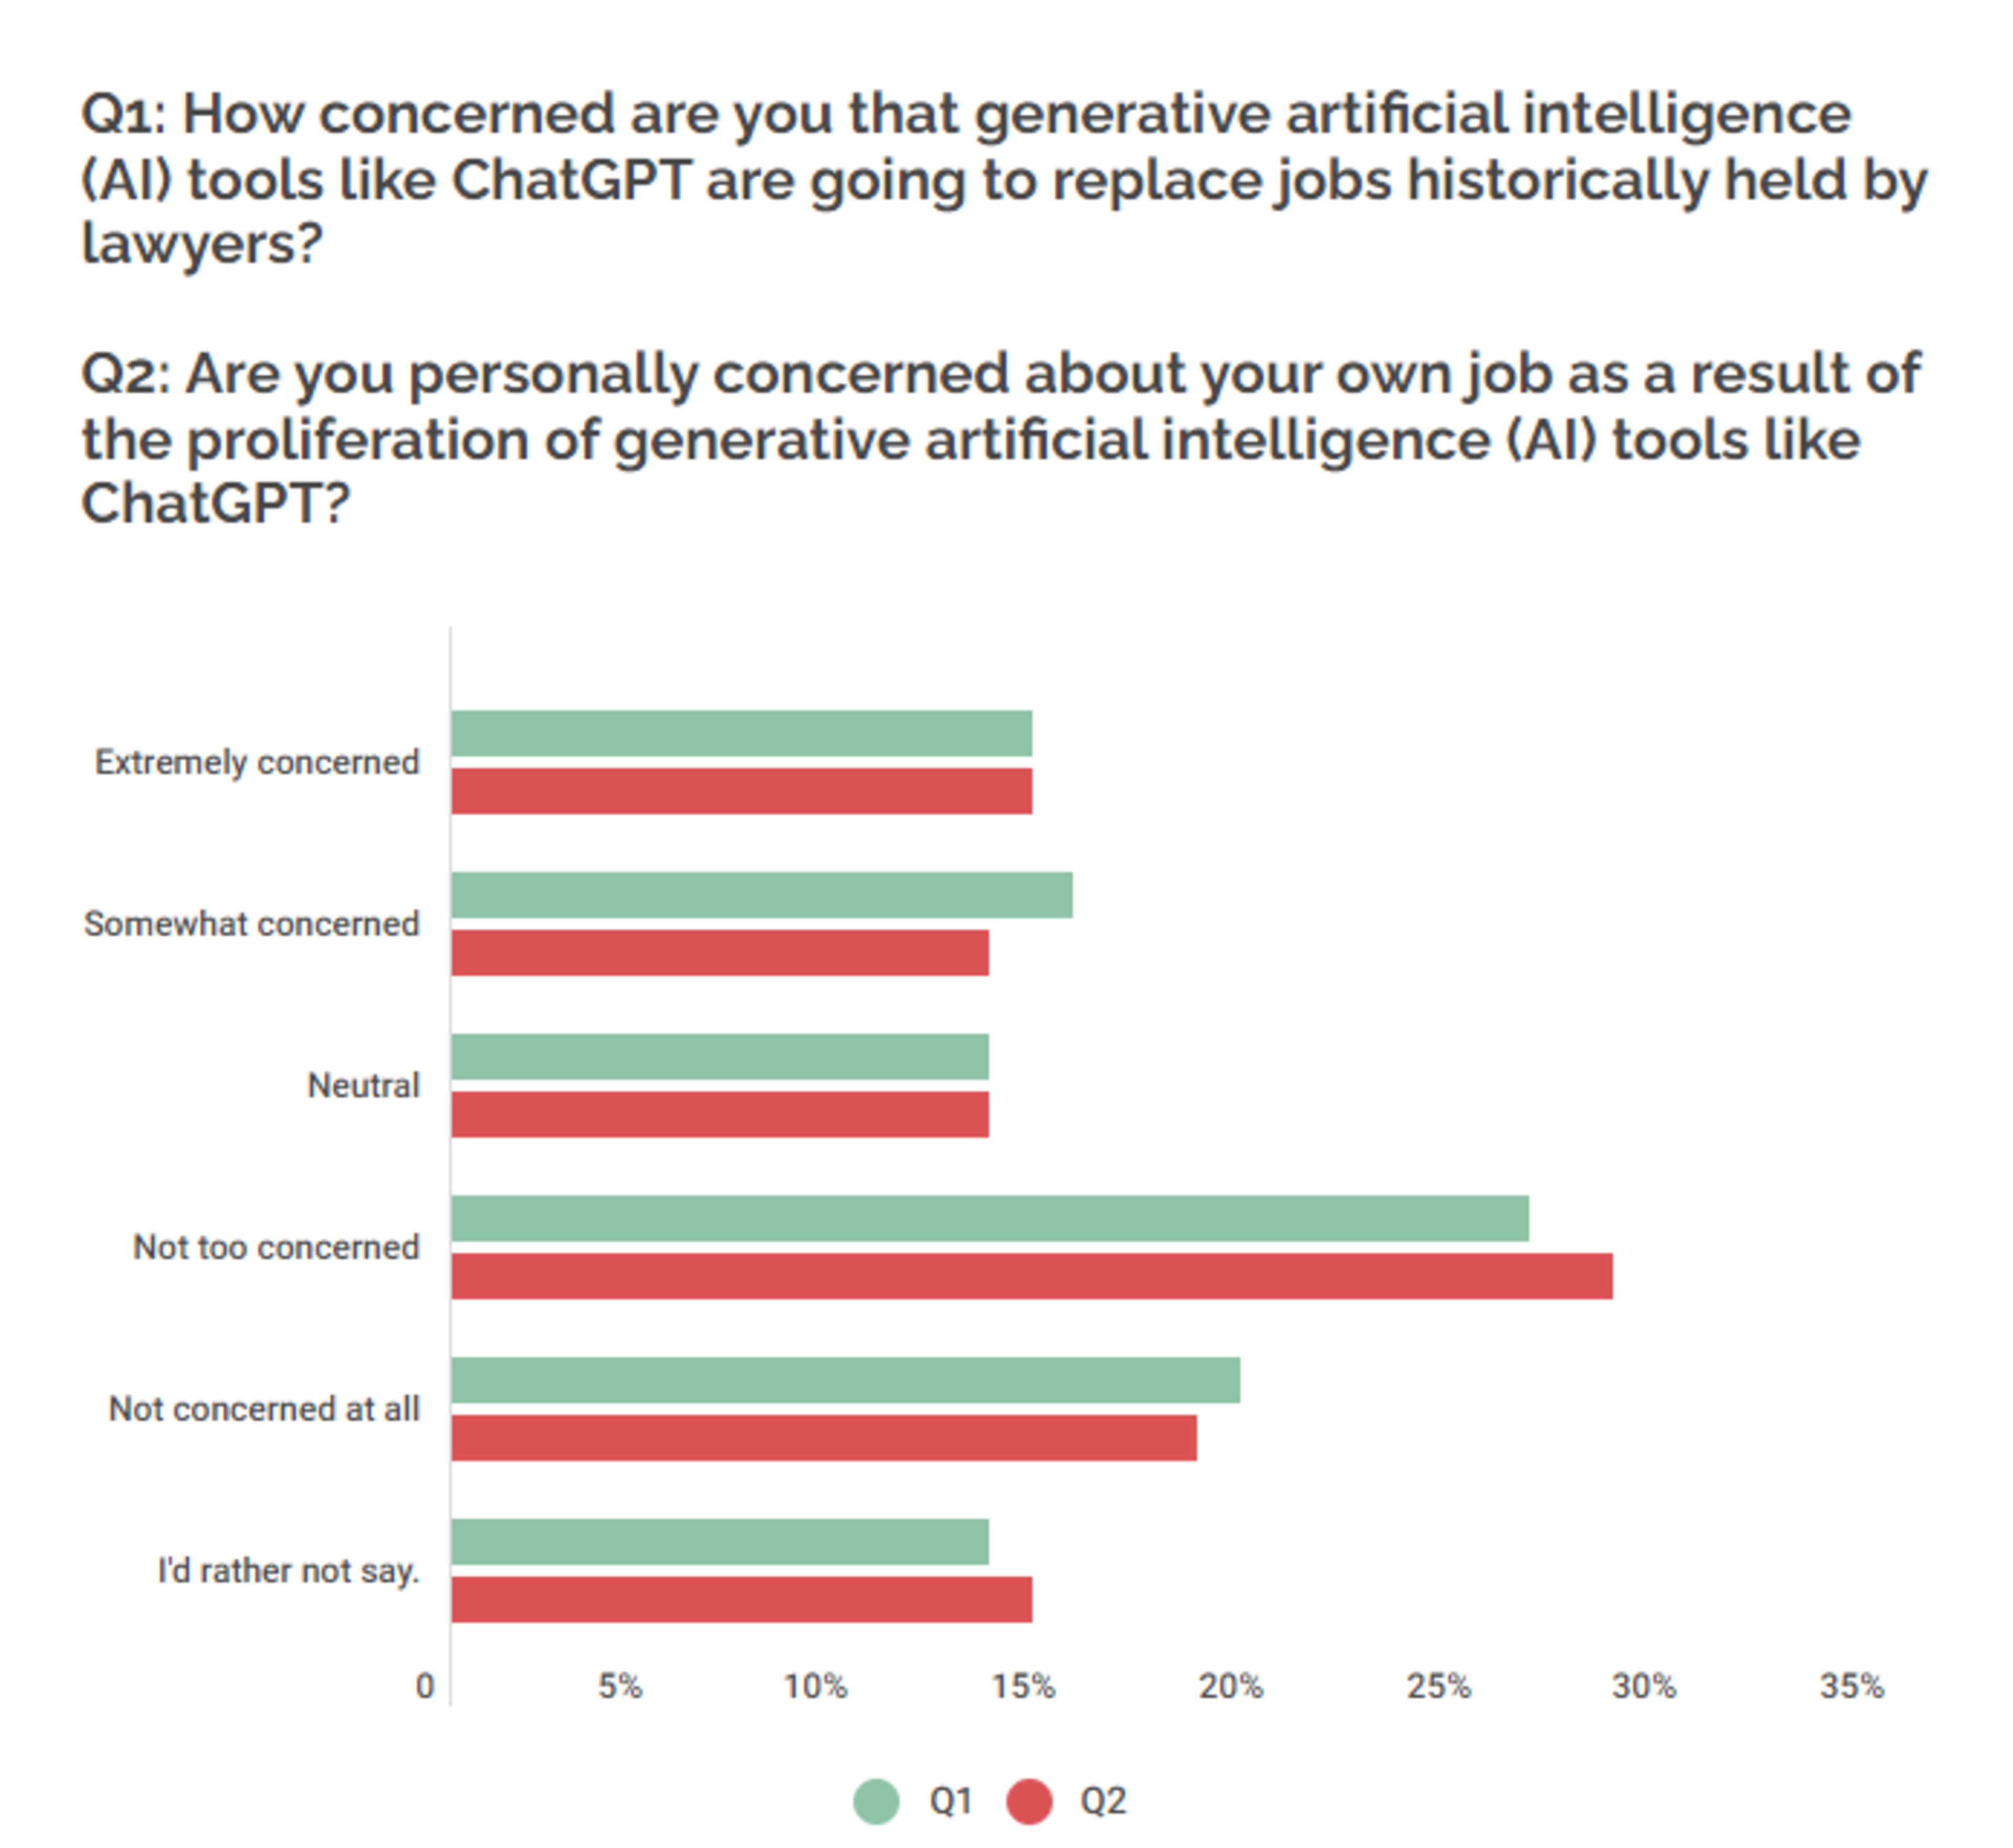 Study: About Half of Lawyers Have Used Generative AI, At Least 20% Don’t Fact Check the Work